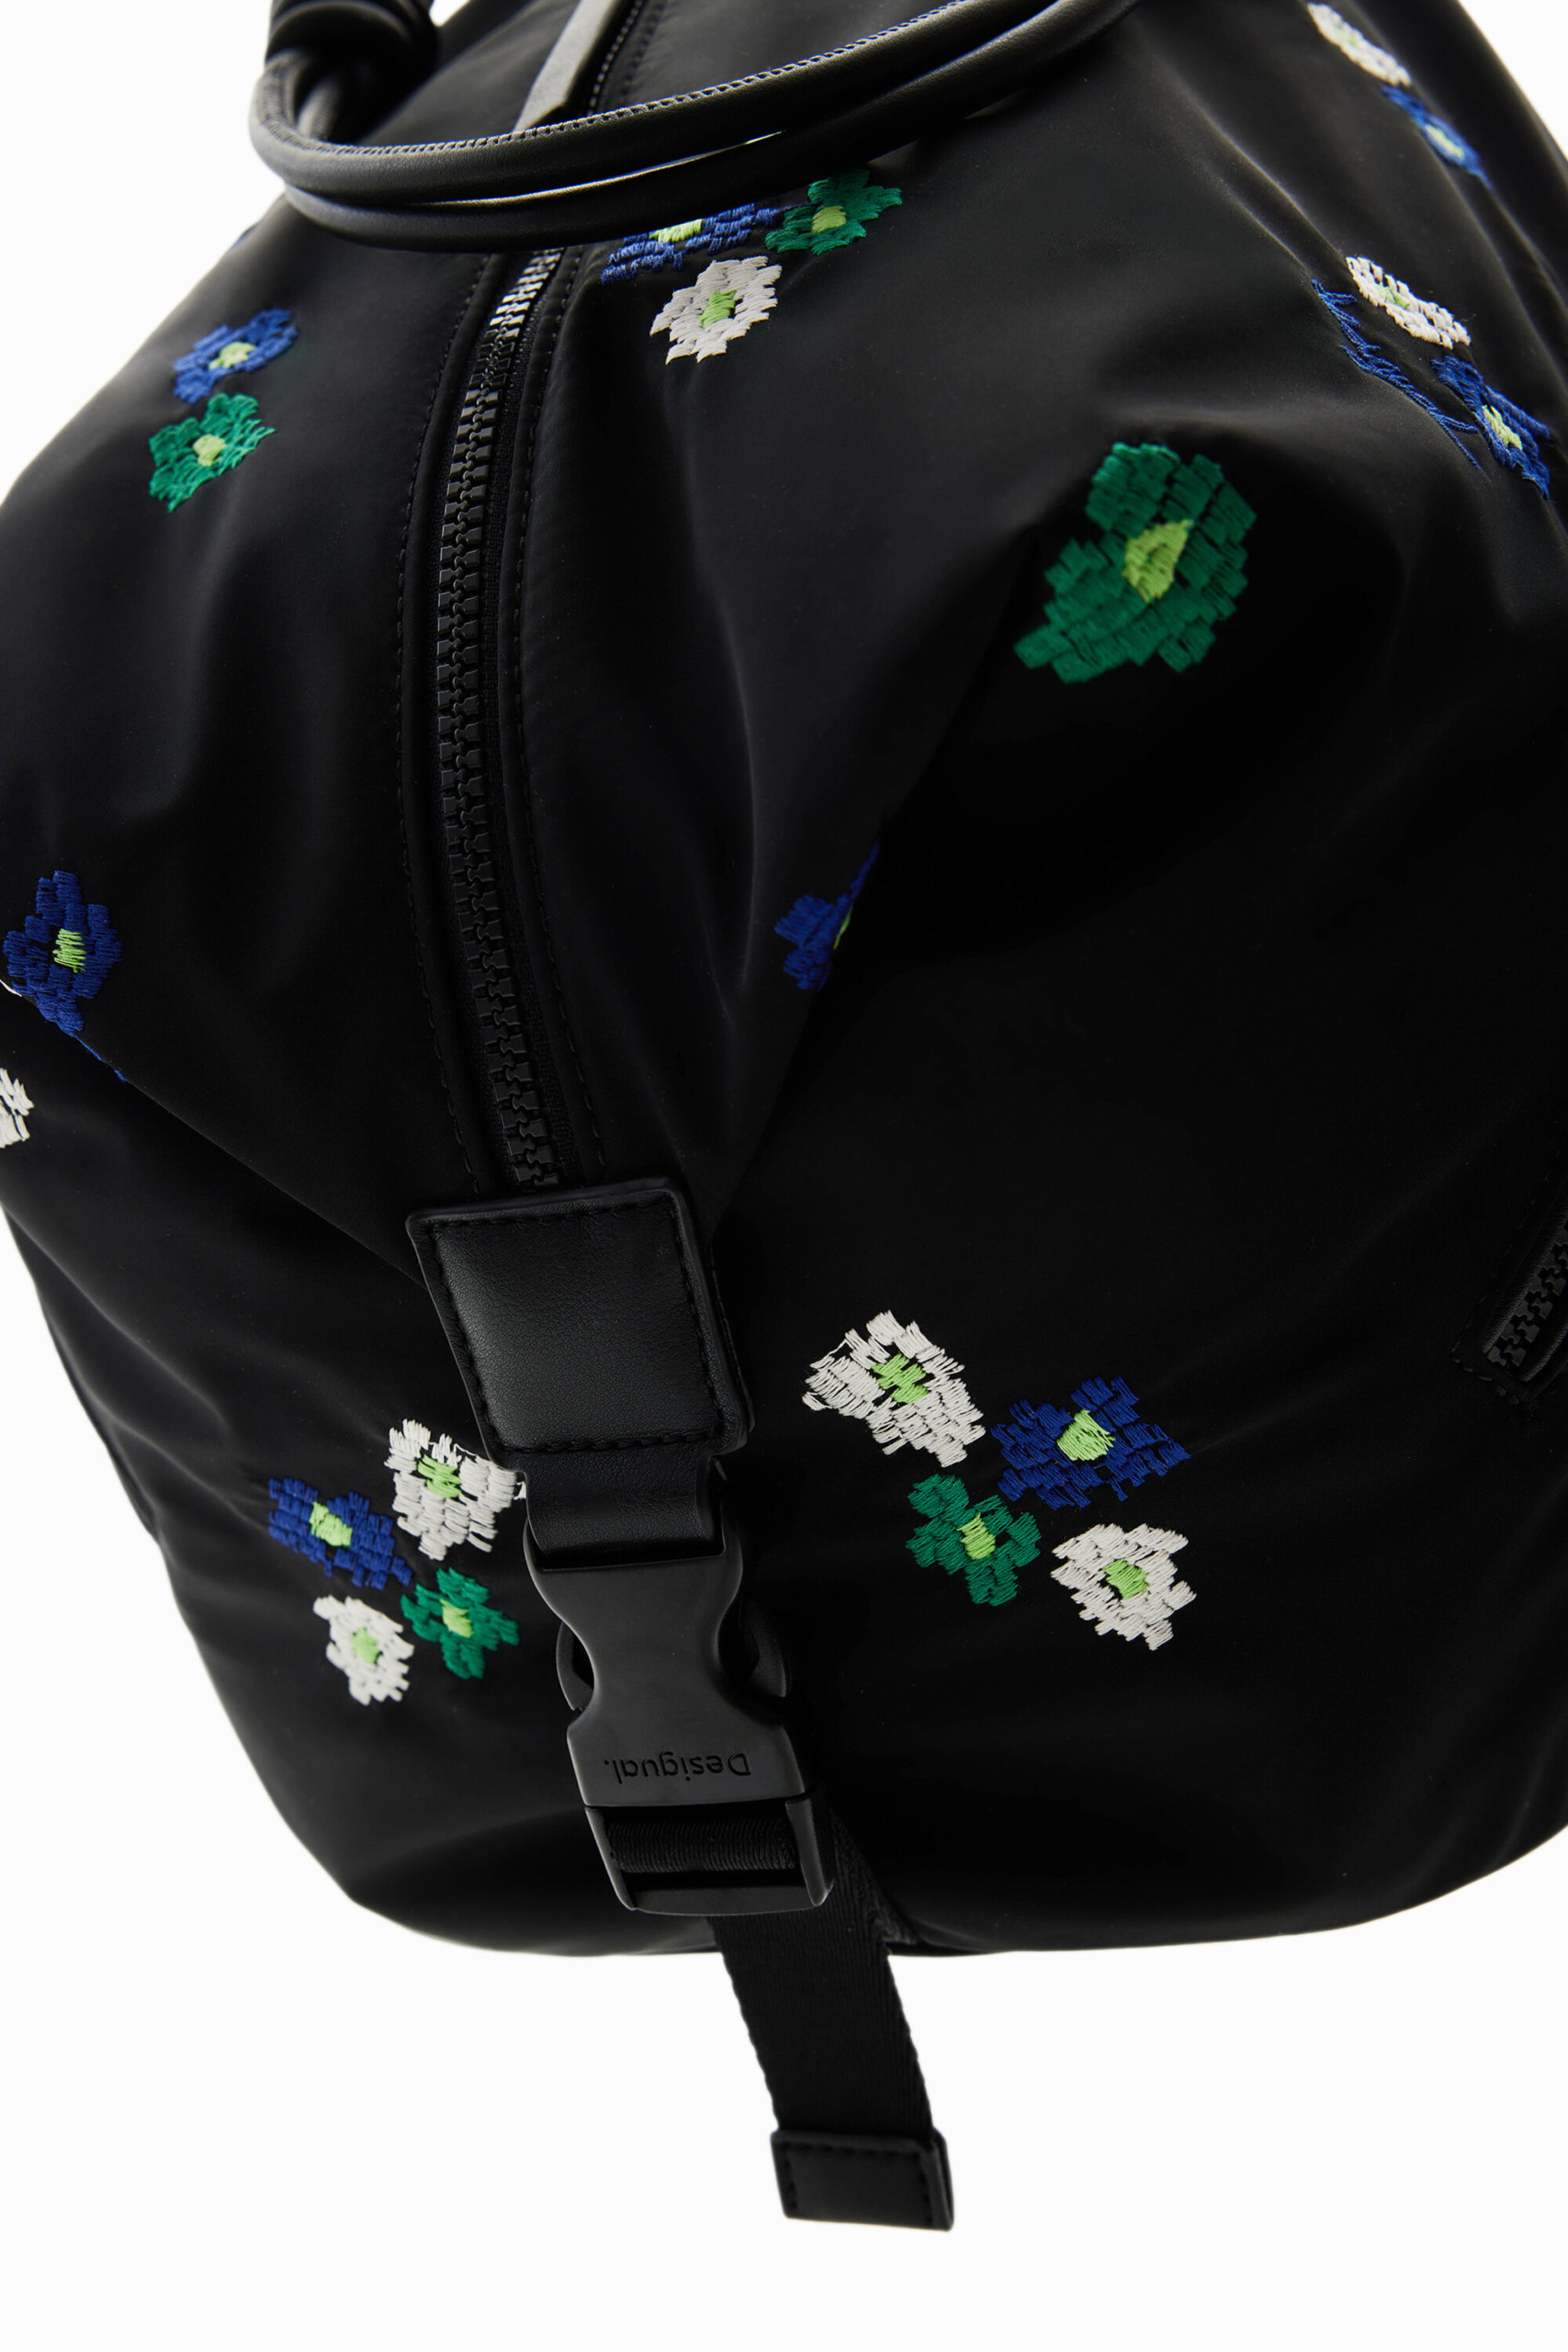 Dedigual Midsize multi position floral backpack 23WAKA03 2000 2 d